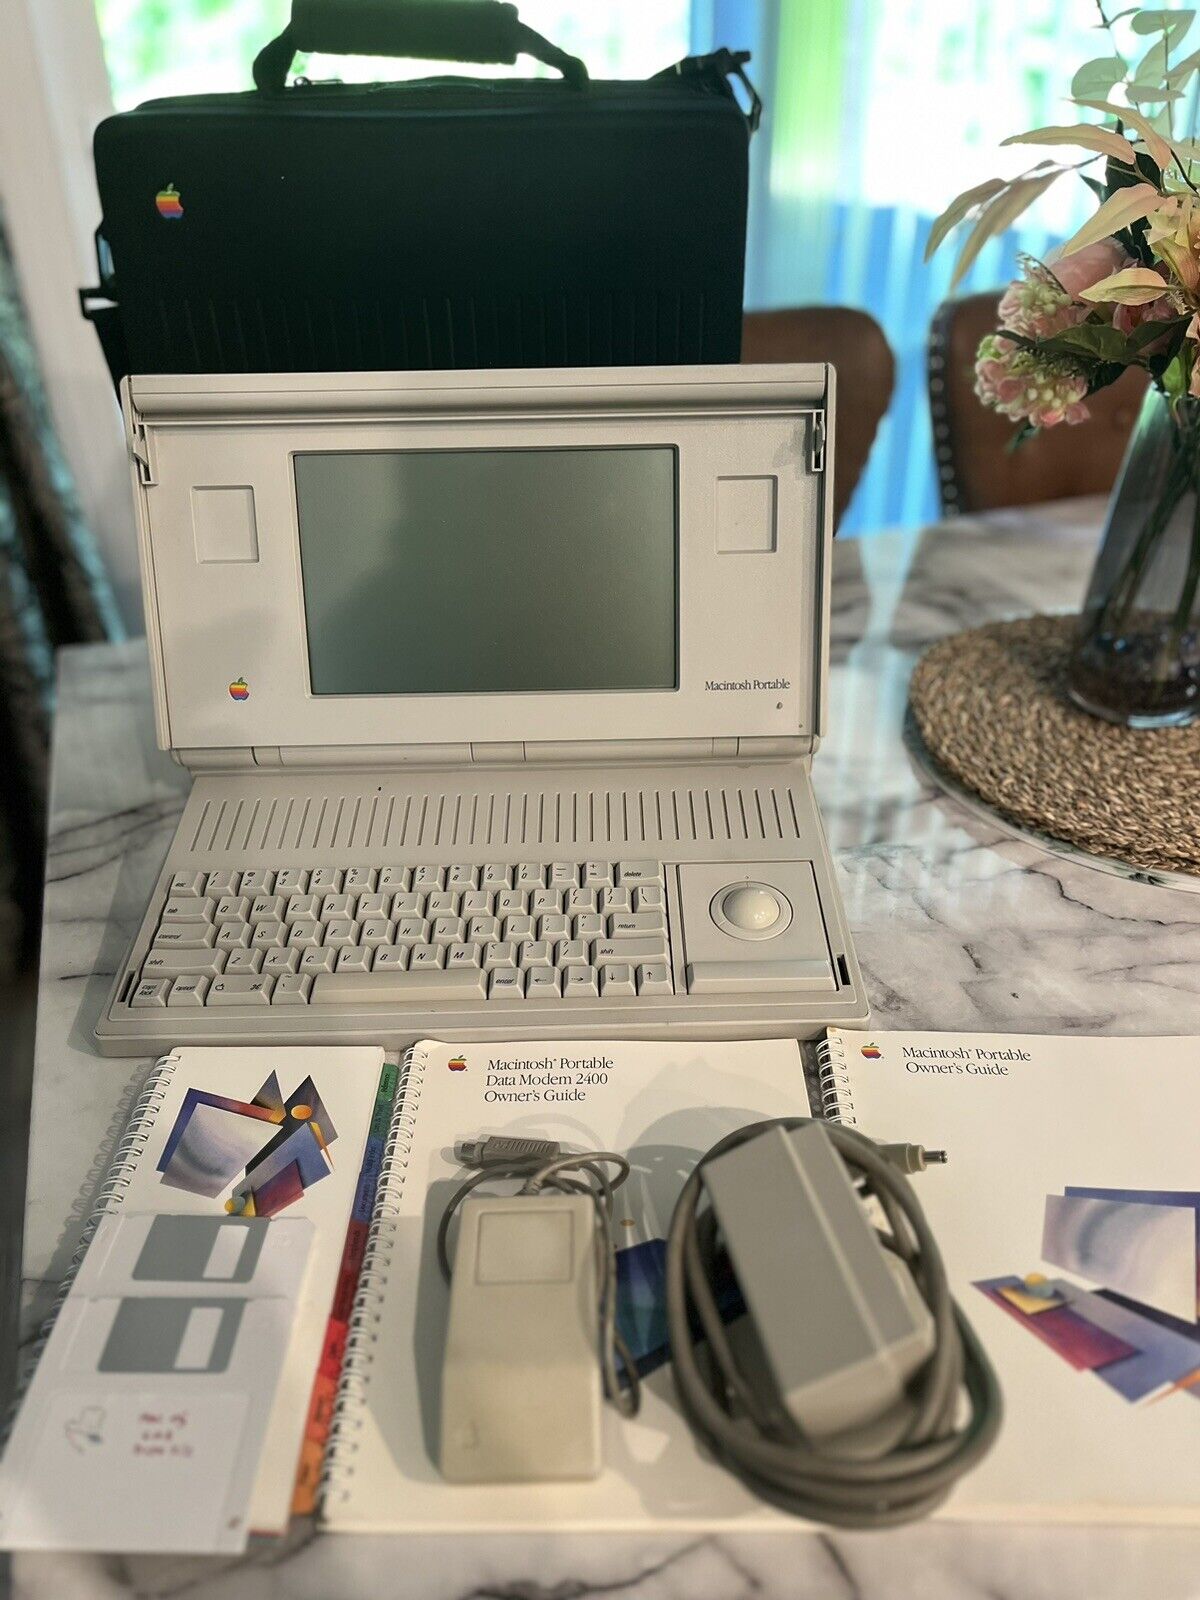 Apple Macintosh Portable - The Company's First Laptop